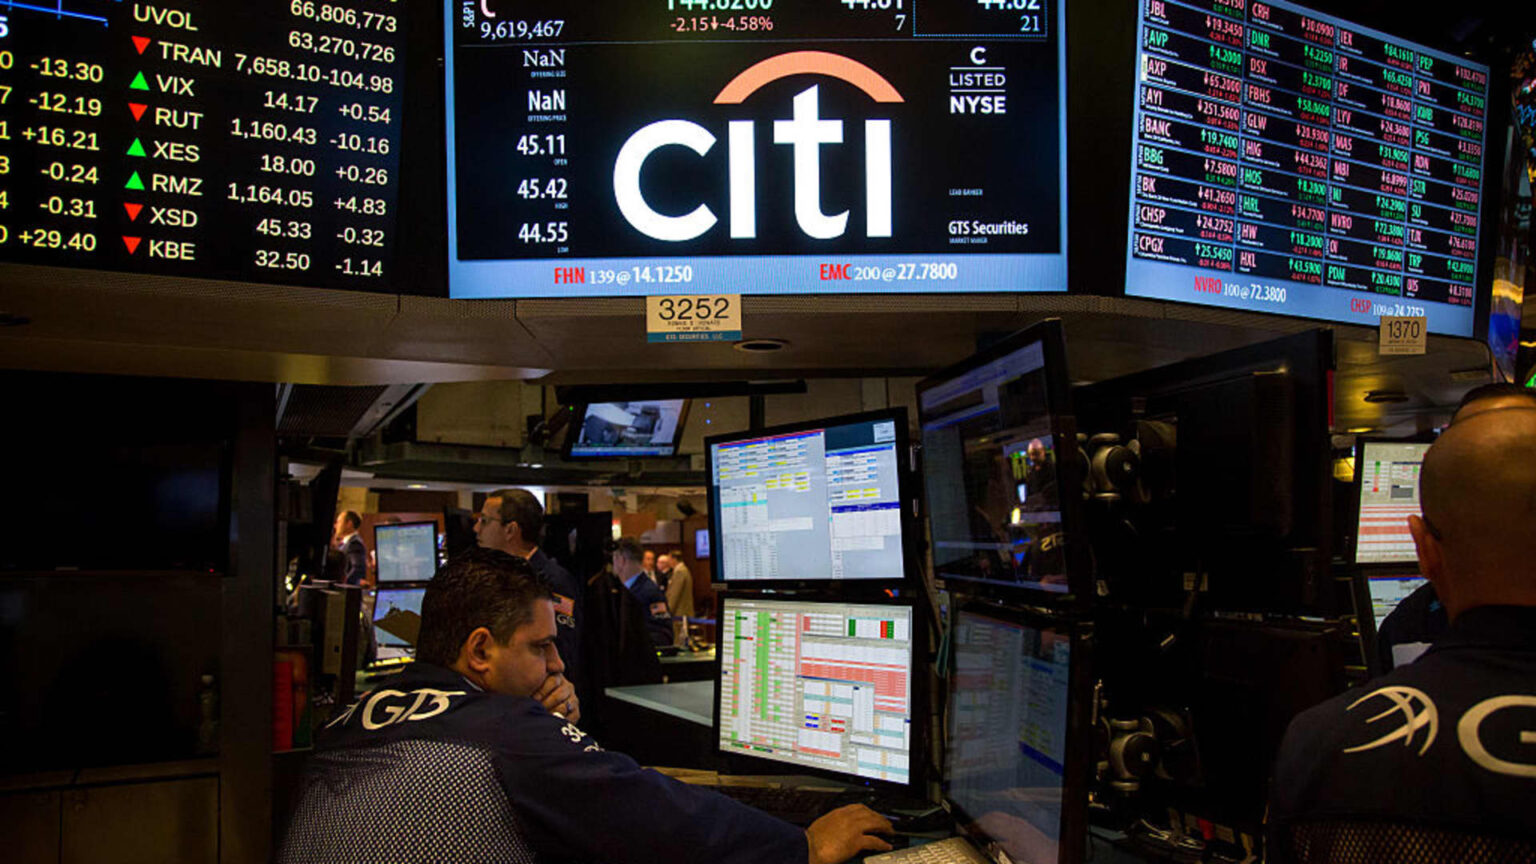 Citigroup to close global distressed-debt unit